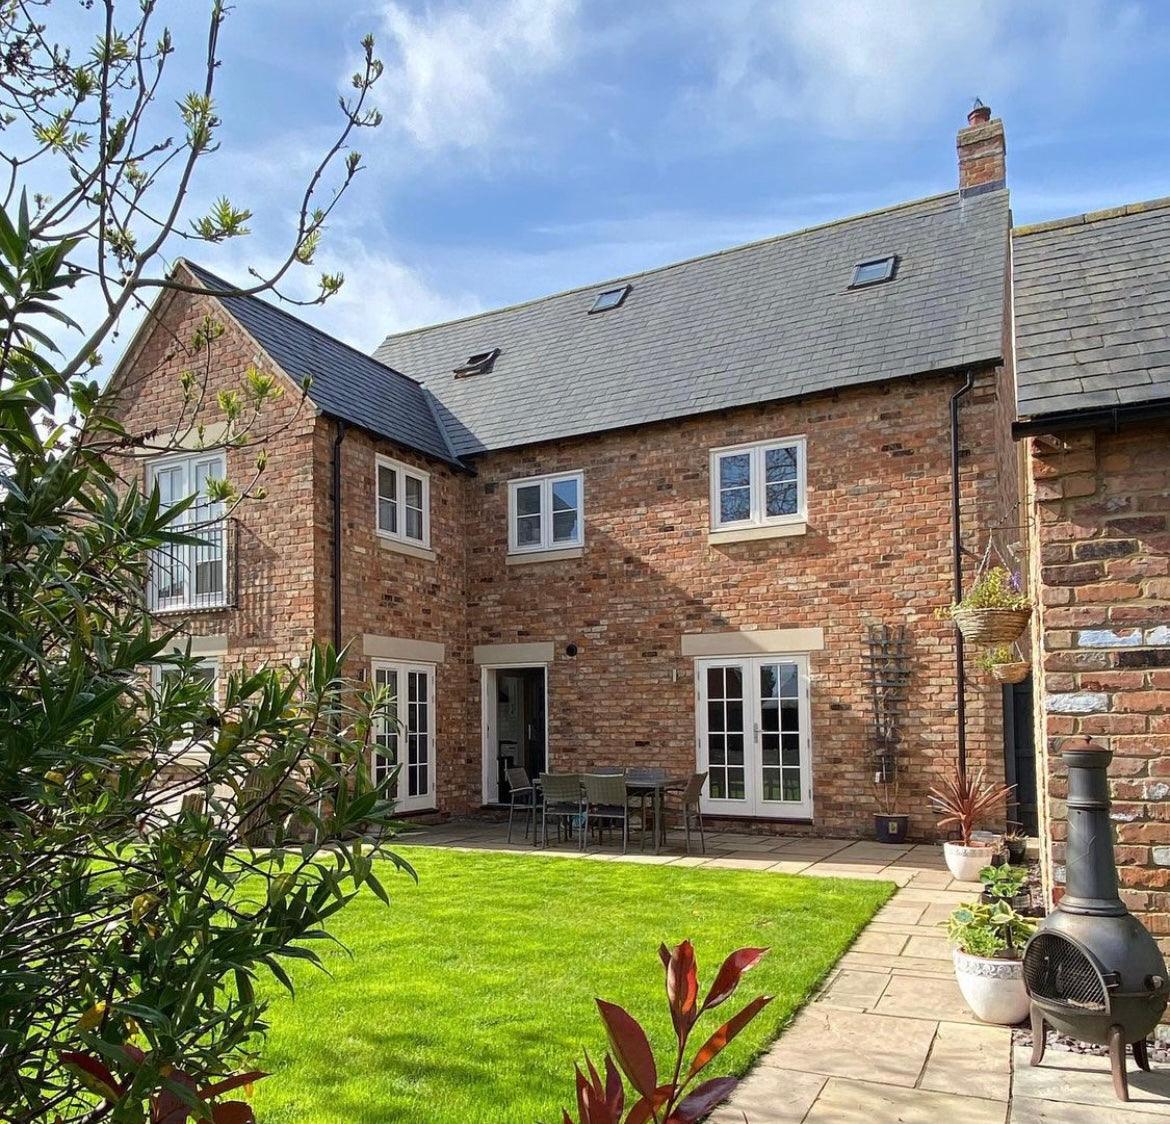 New Build Home Built with Reclaimed Wirecut Bricks - Cirencester, England - Reclaimed Brick Company